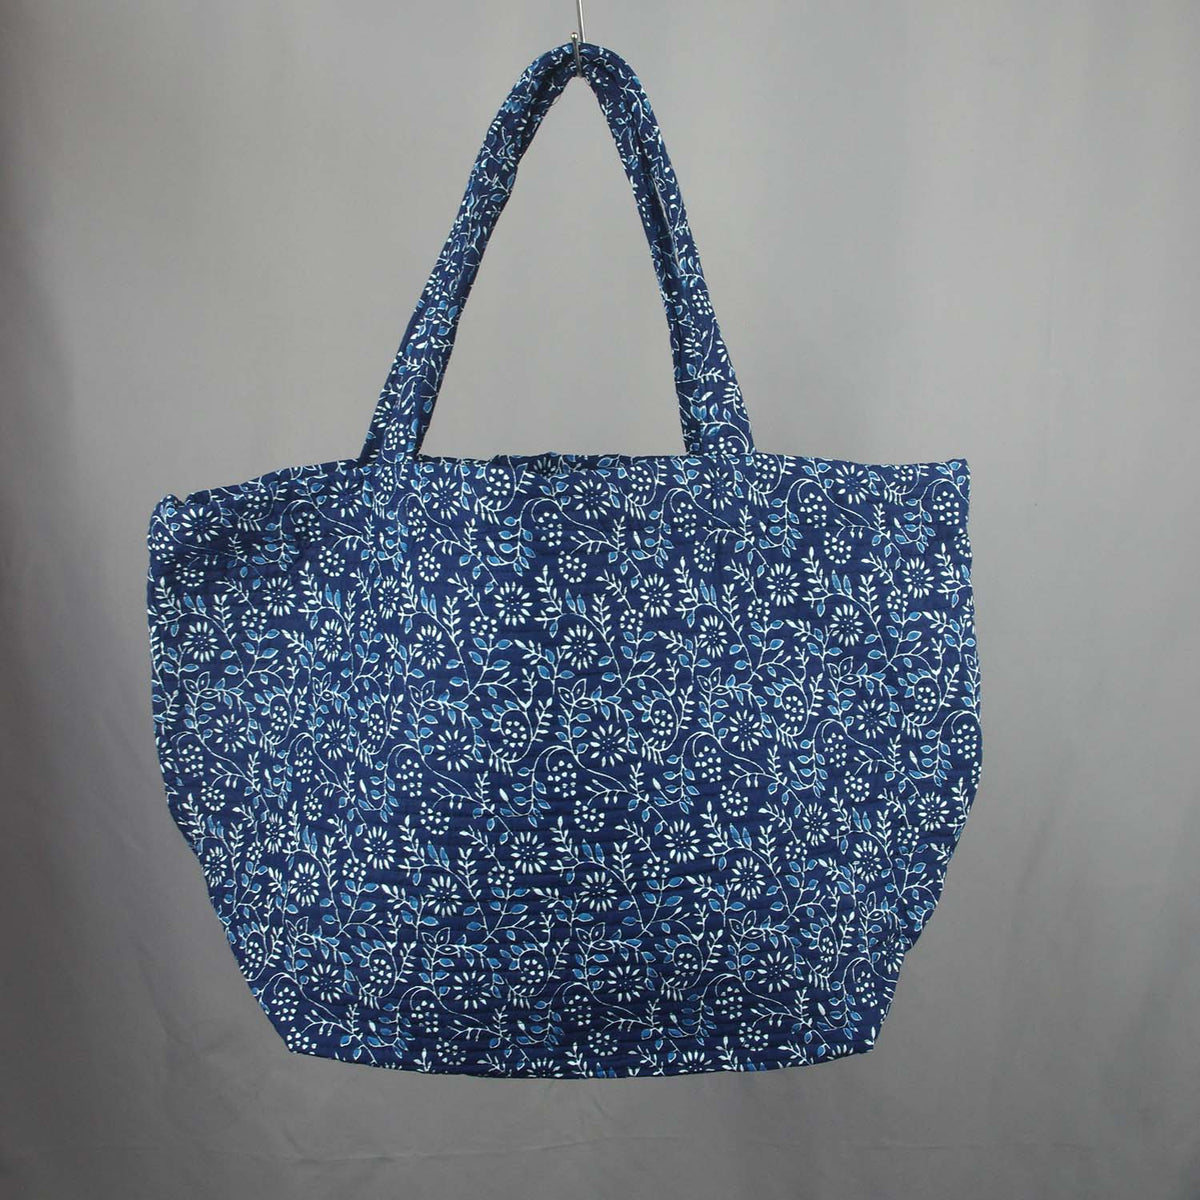 Cotton Quilted Large Shoppping / Beach Bag - Indigo Floral Jaal